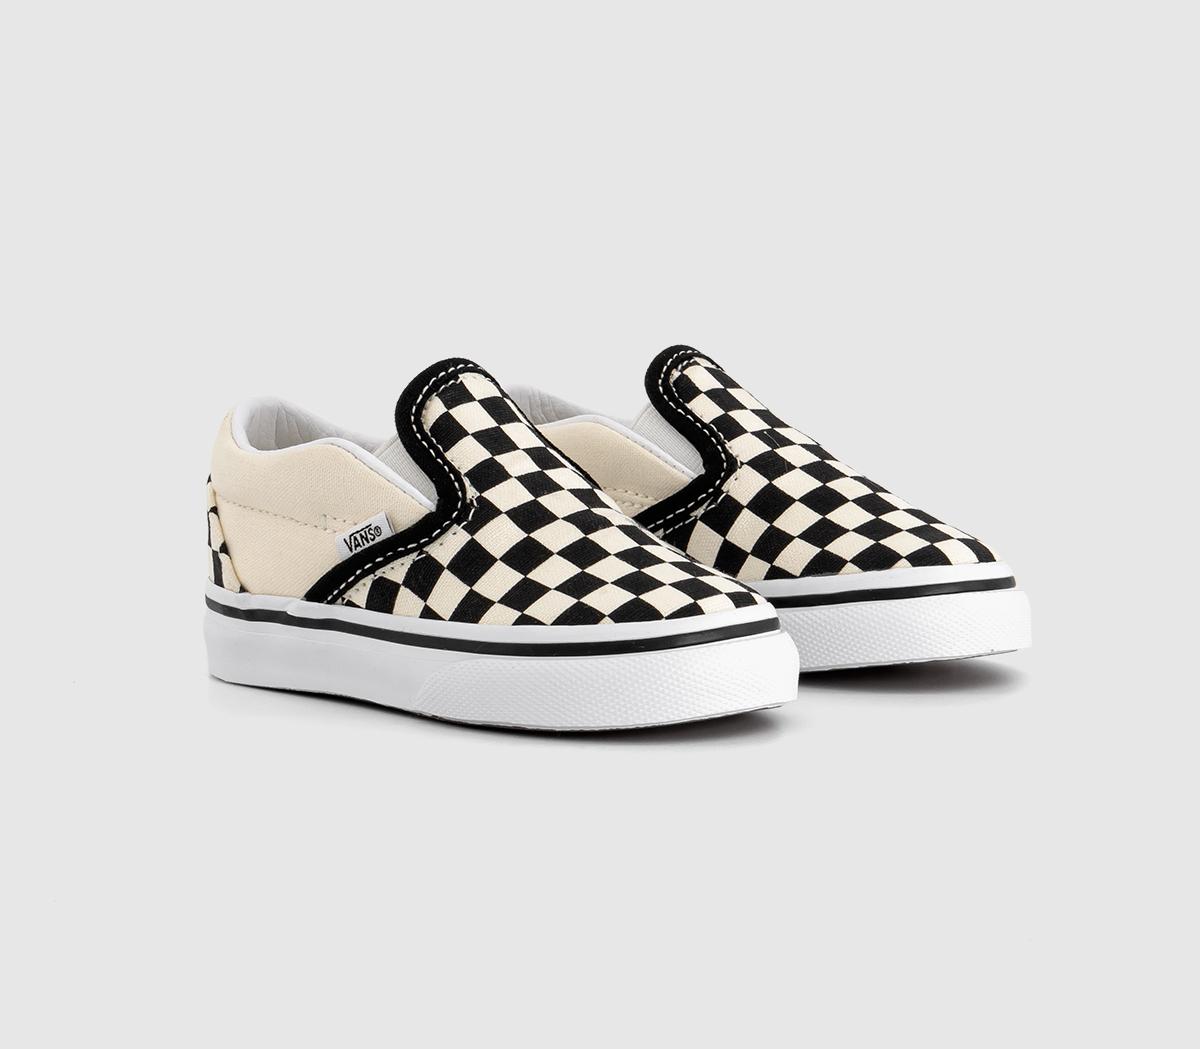 Vans Kids Toddlers Black And White Checkerboard Classic Slip On, Size: 8 Infant